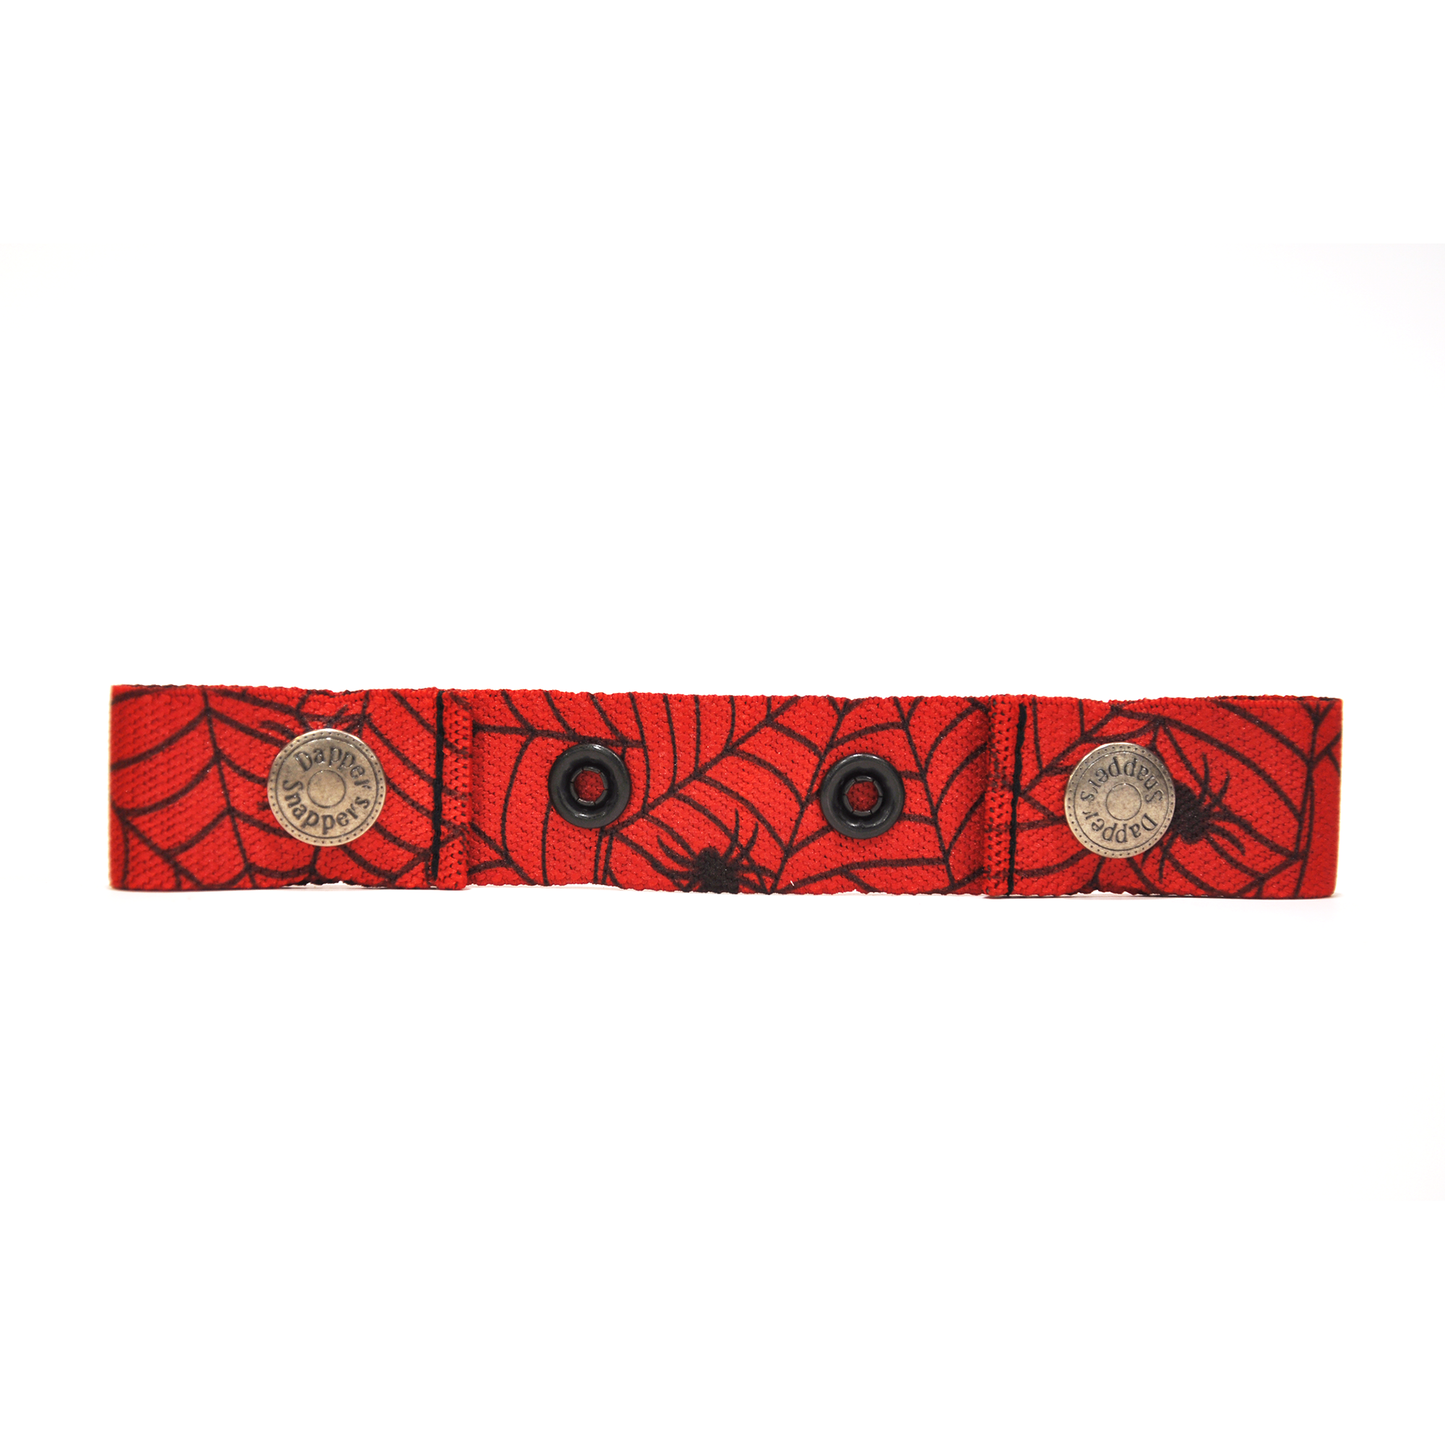 Dapper Snappers Made In the USA Baby & Toddler Adjustable Belt Patterns